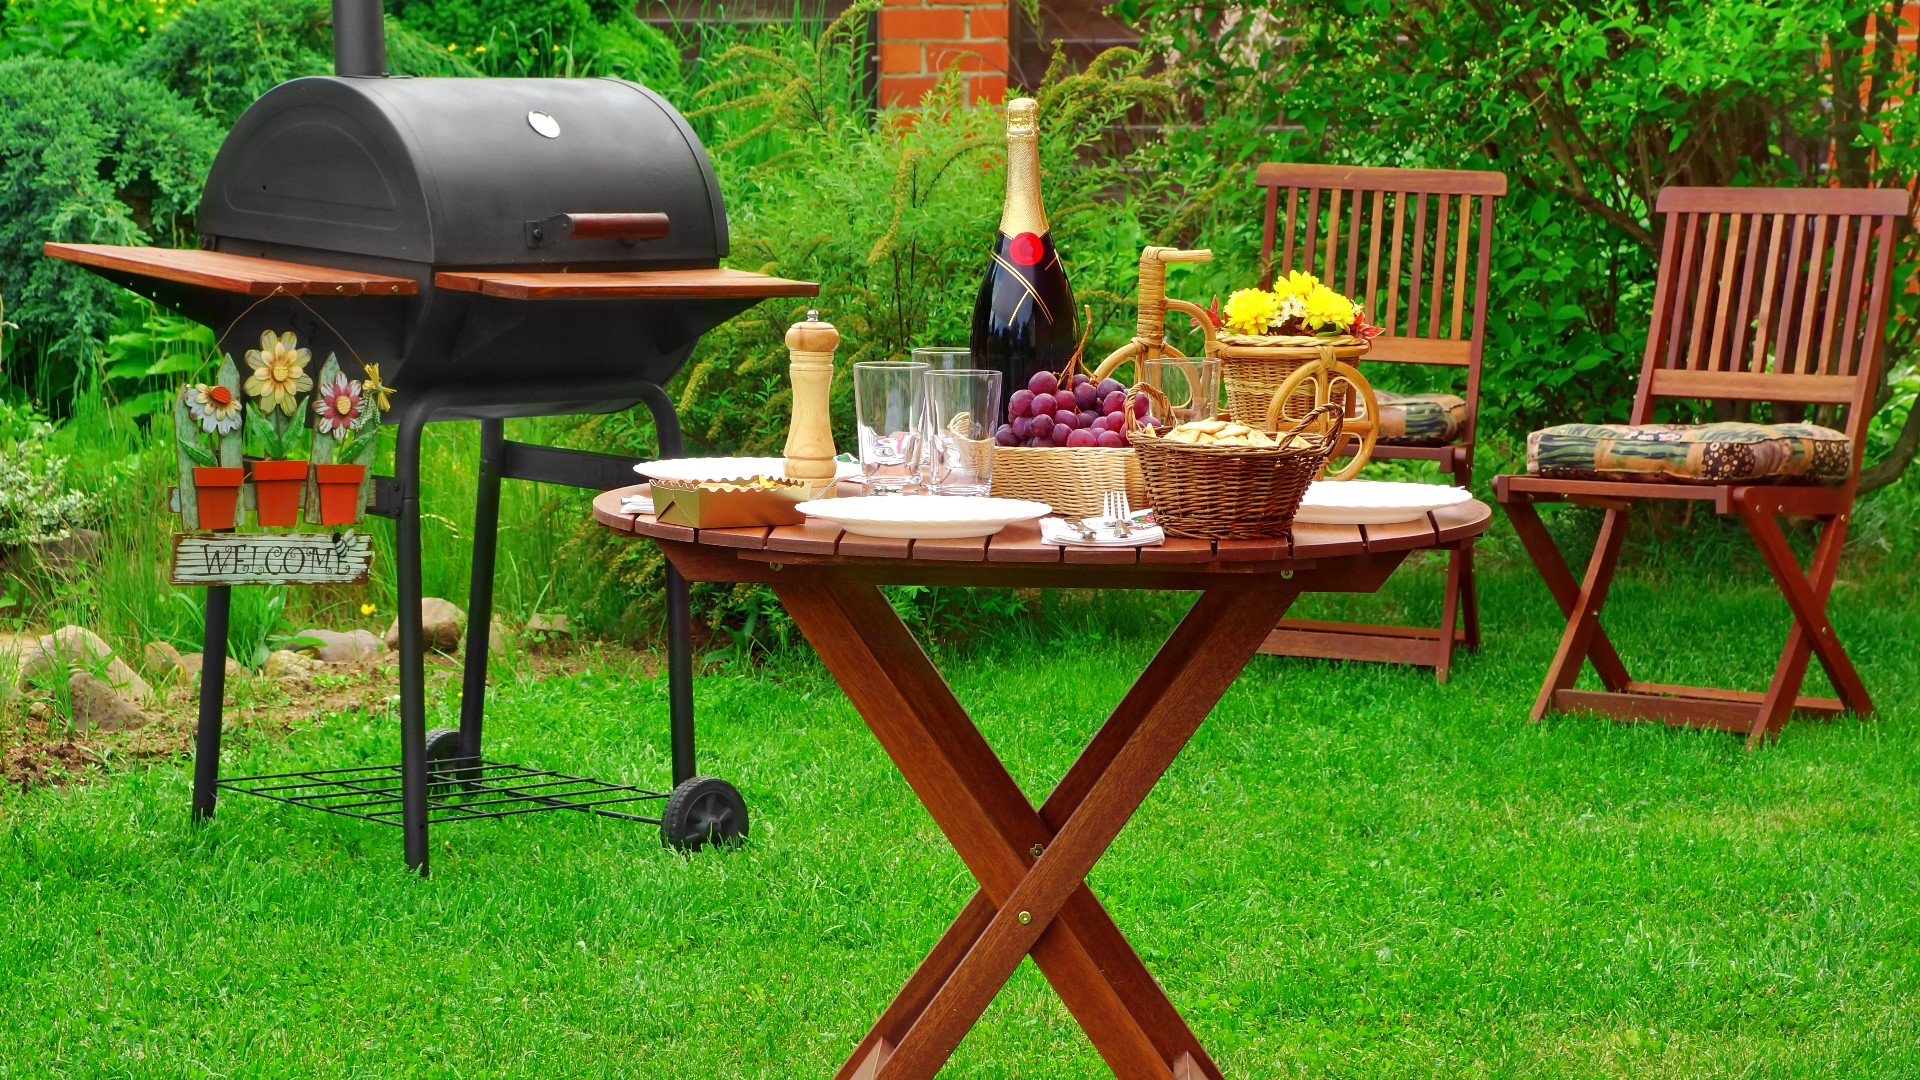 Sponsored by: Limor Media. Lifestyle Contributor Limor Suss shares tips on how to throw a successful cookout this Memorial Day Weekend. For more info go to limor.tv.